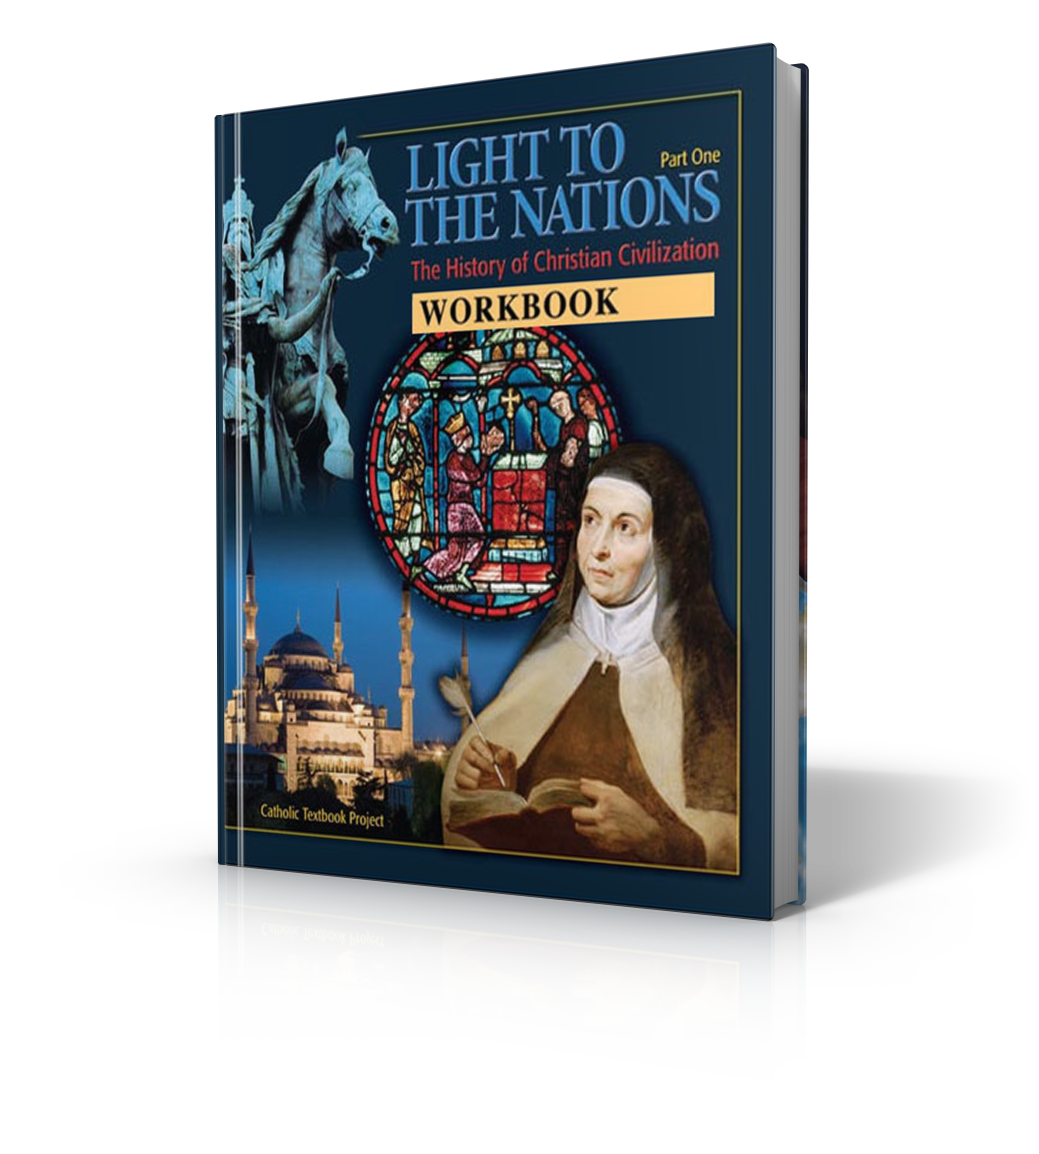 Light to the Nations, Part I: History of Christian Civilization (Workbook)